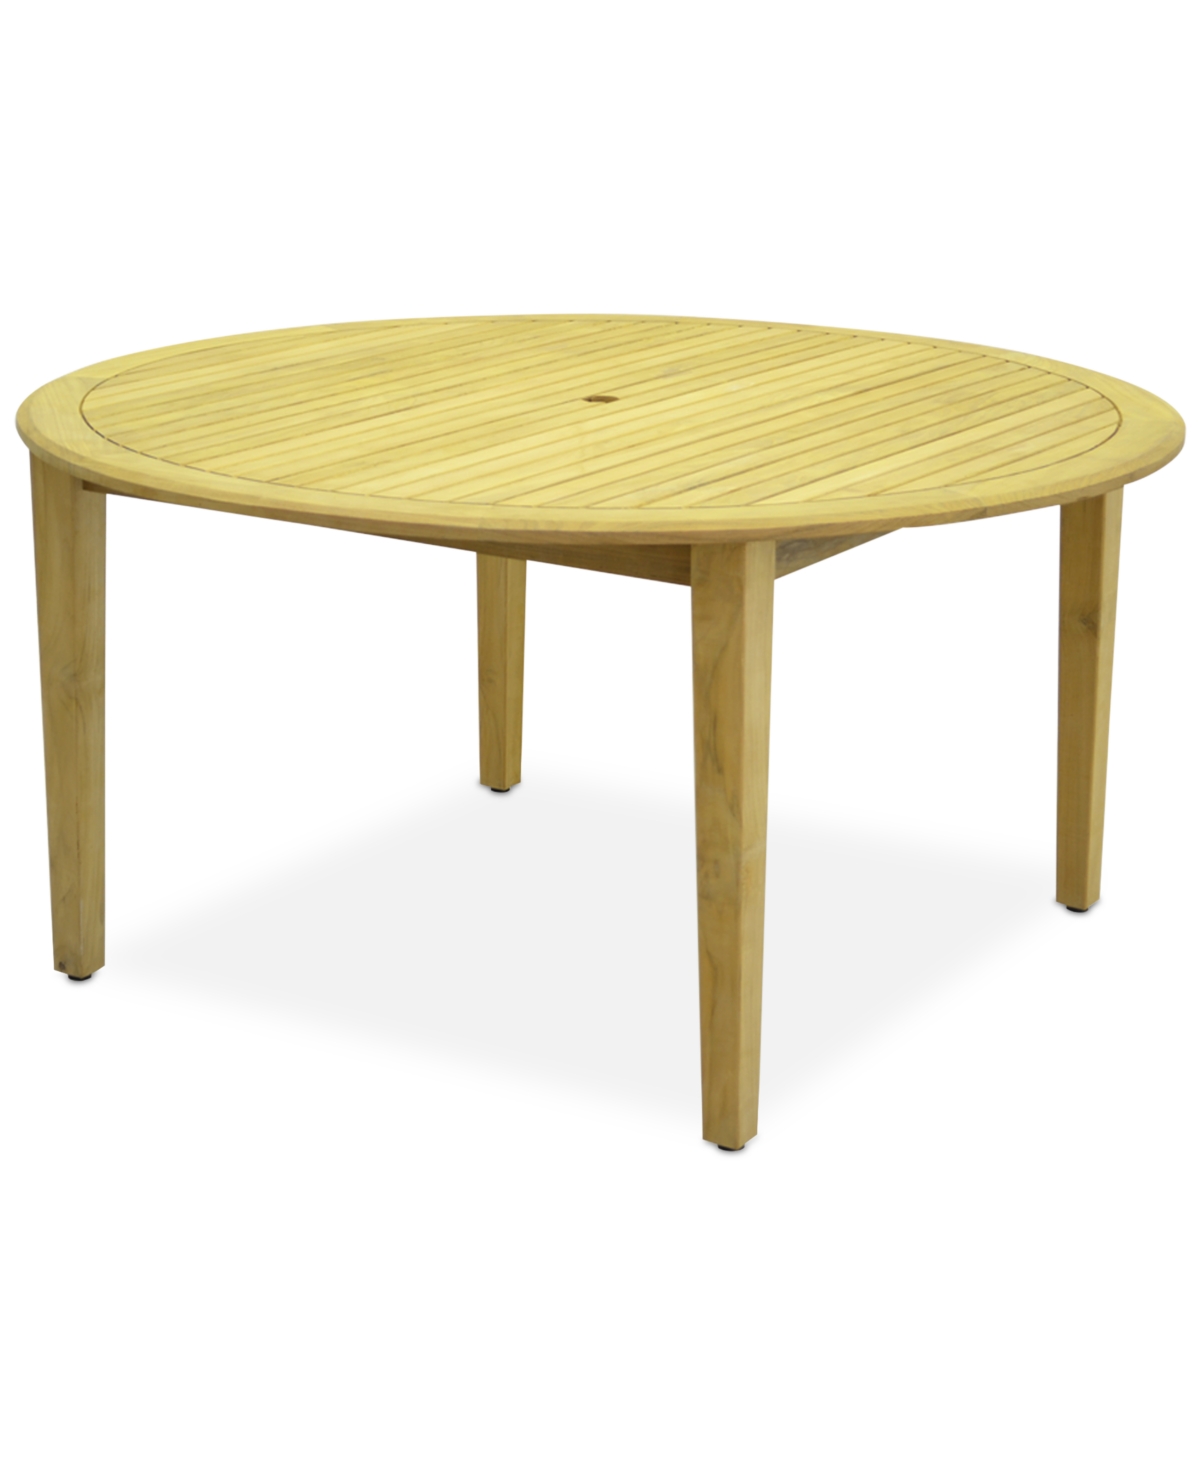 Furniture Longstock Outdoor Teak Dining Table, Created For Macy's